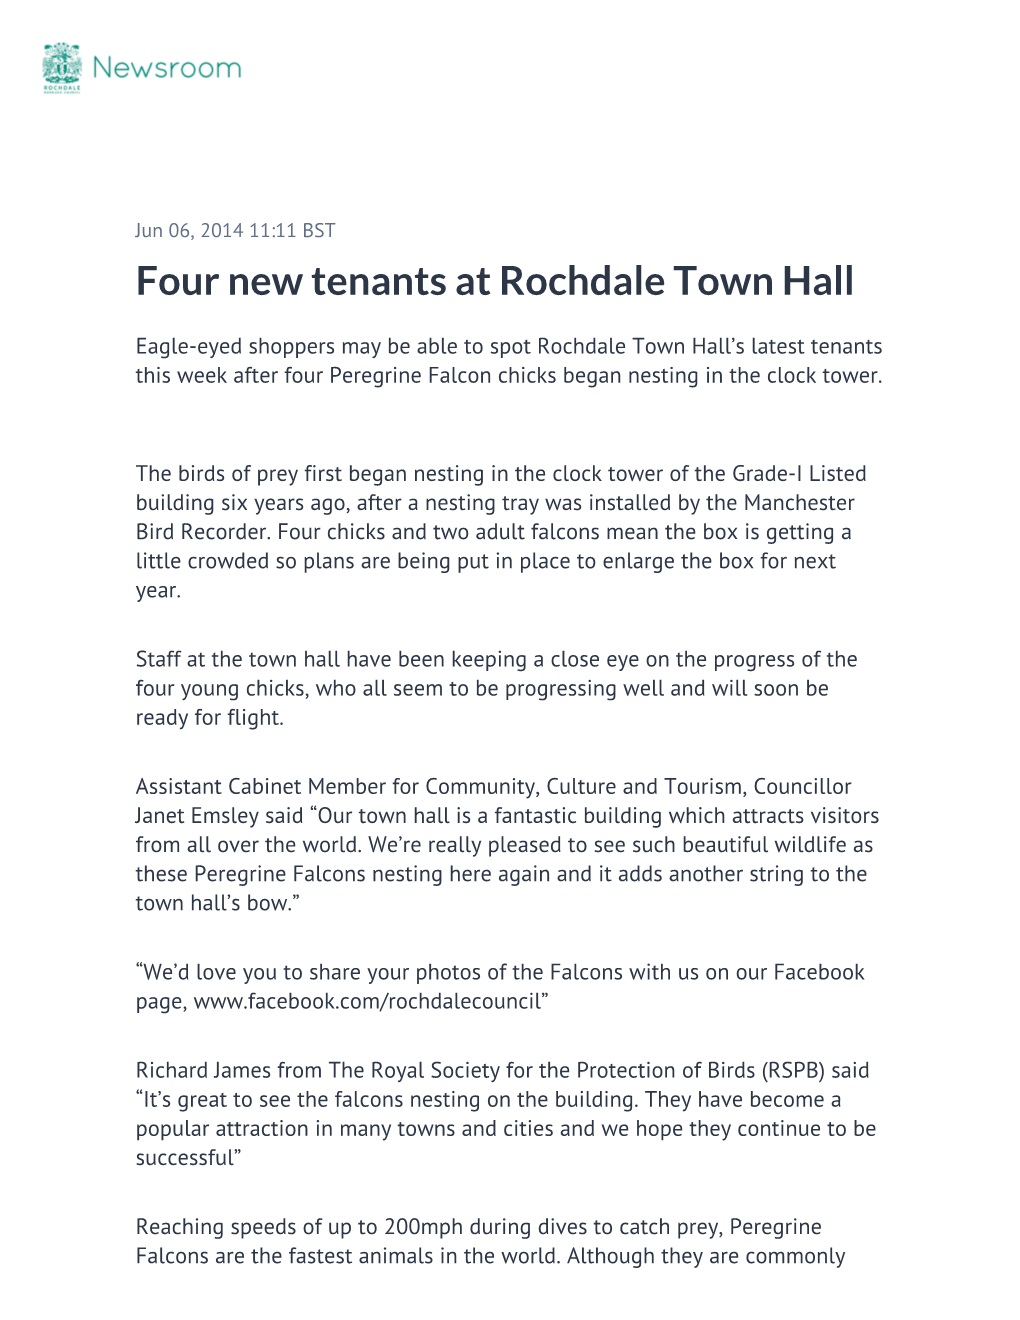 Four New Tenants at Rochdale Town Hall